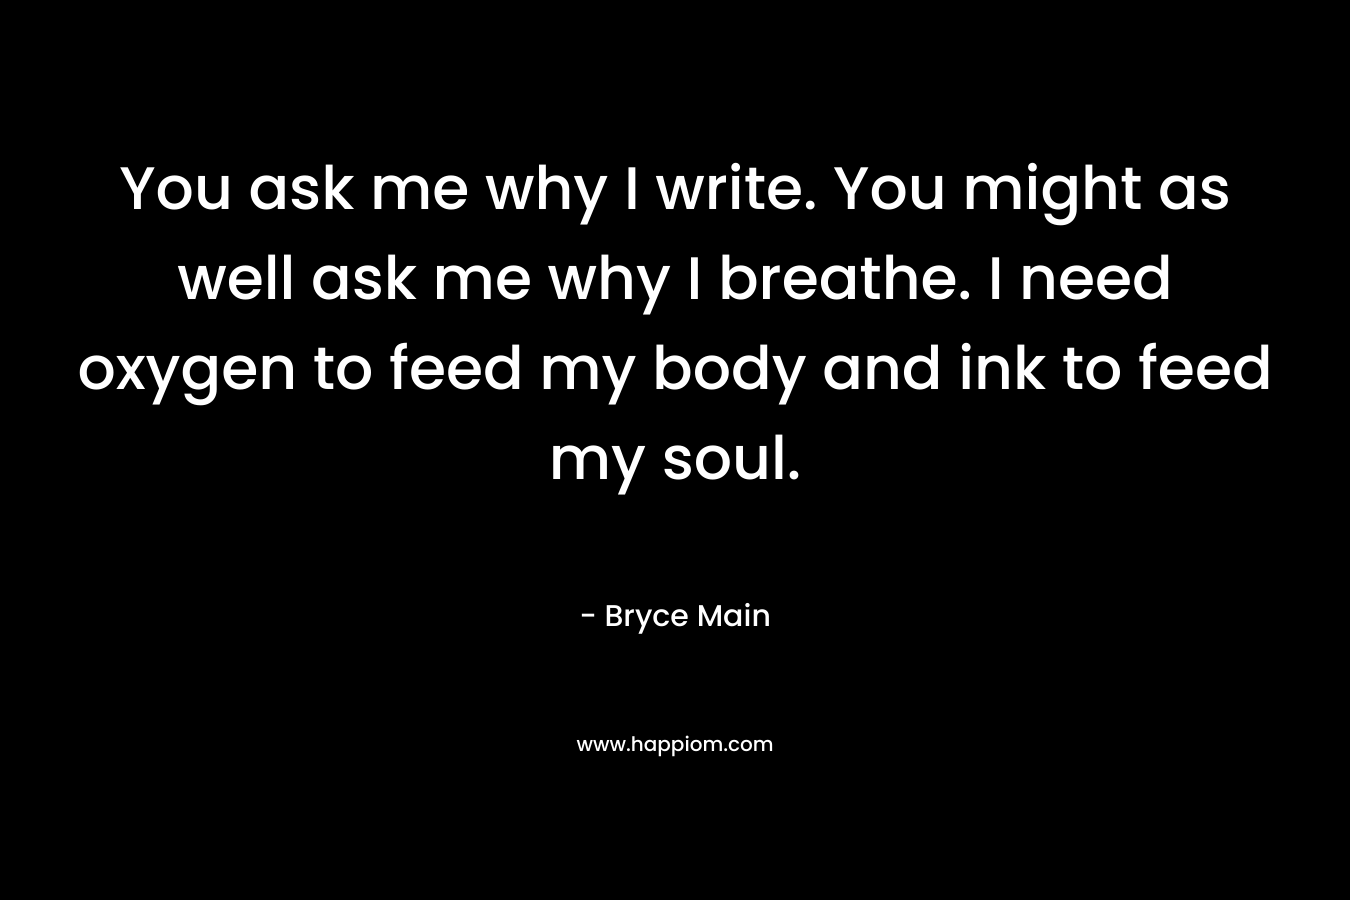 You ask me why I write. You might as well ask me why I breathe. I need oxygen to feed my body and ink to feed my soul.